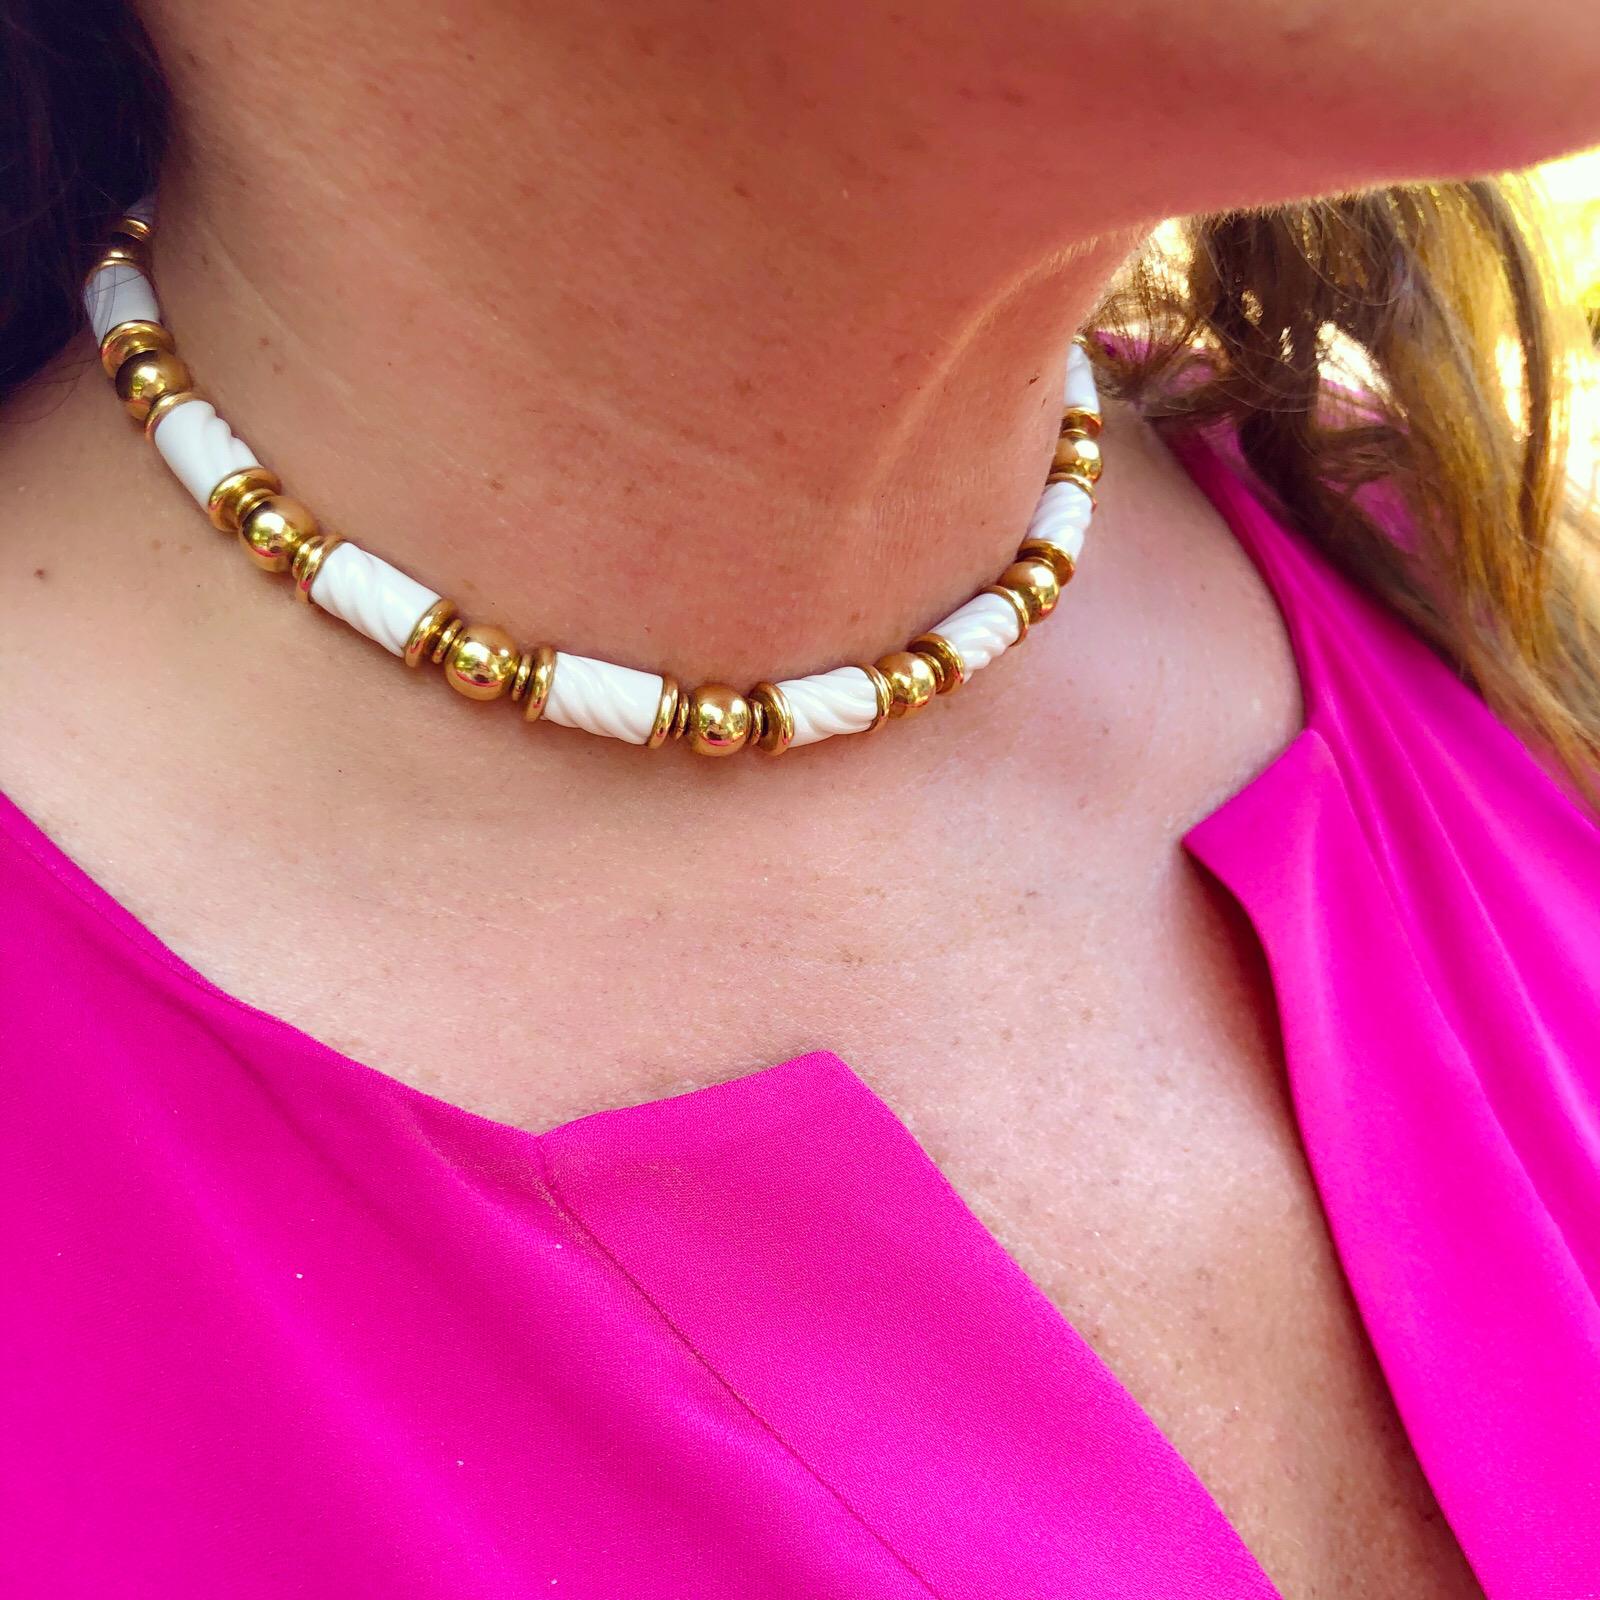 Bulgari 18Kt Yellow Gold & Porcelain Beaded Necklace from the Chandra Collection. The necklace measures 16 inches long and 8mm wide, weighing 77.4 grams.